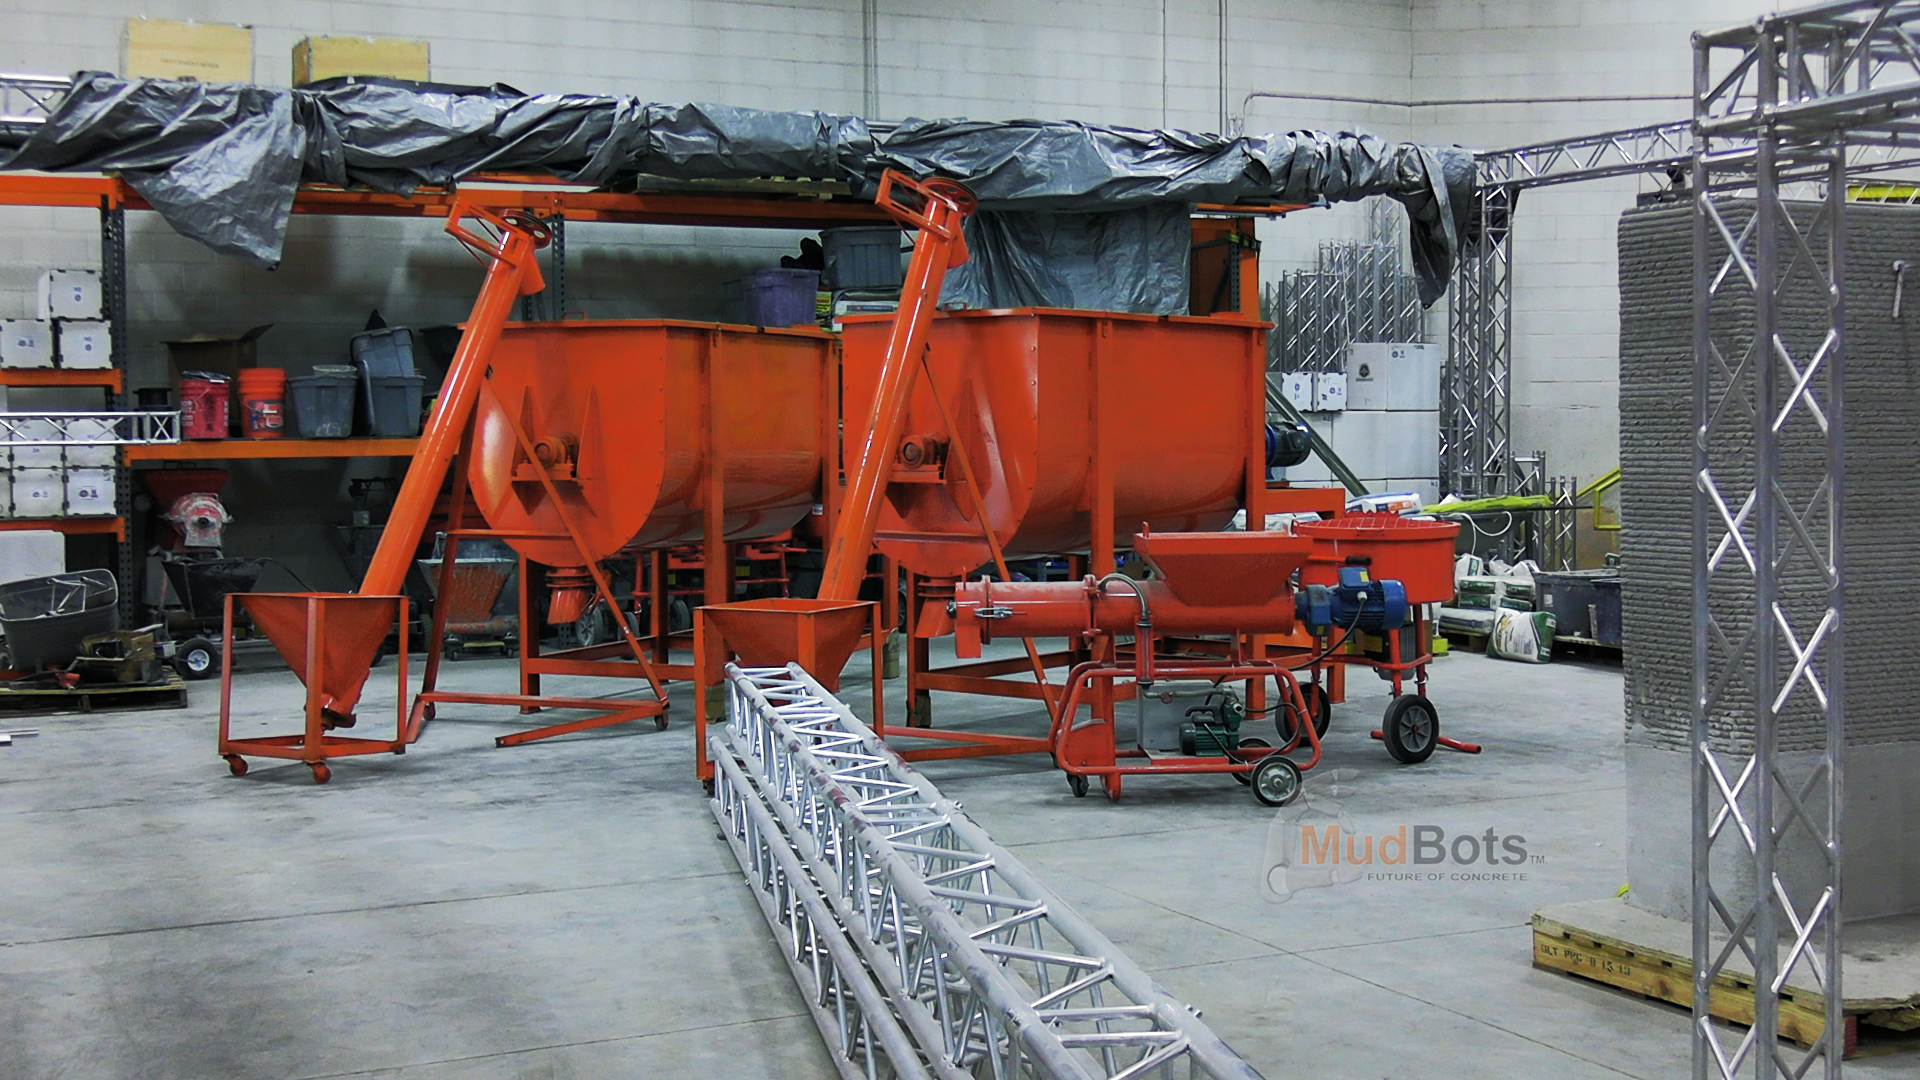 Take a look at the mixers we use for the concrete mixes we use in concrete printing